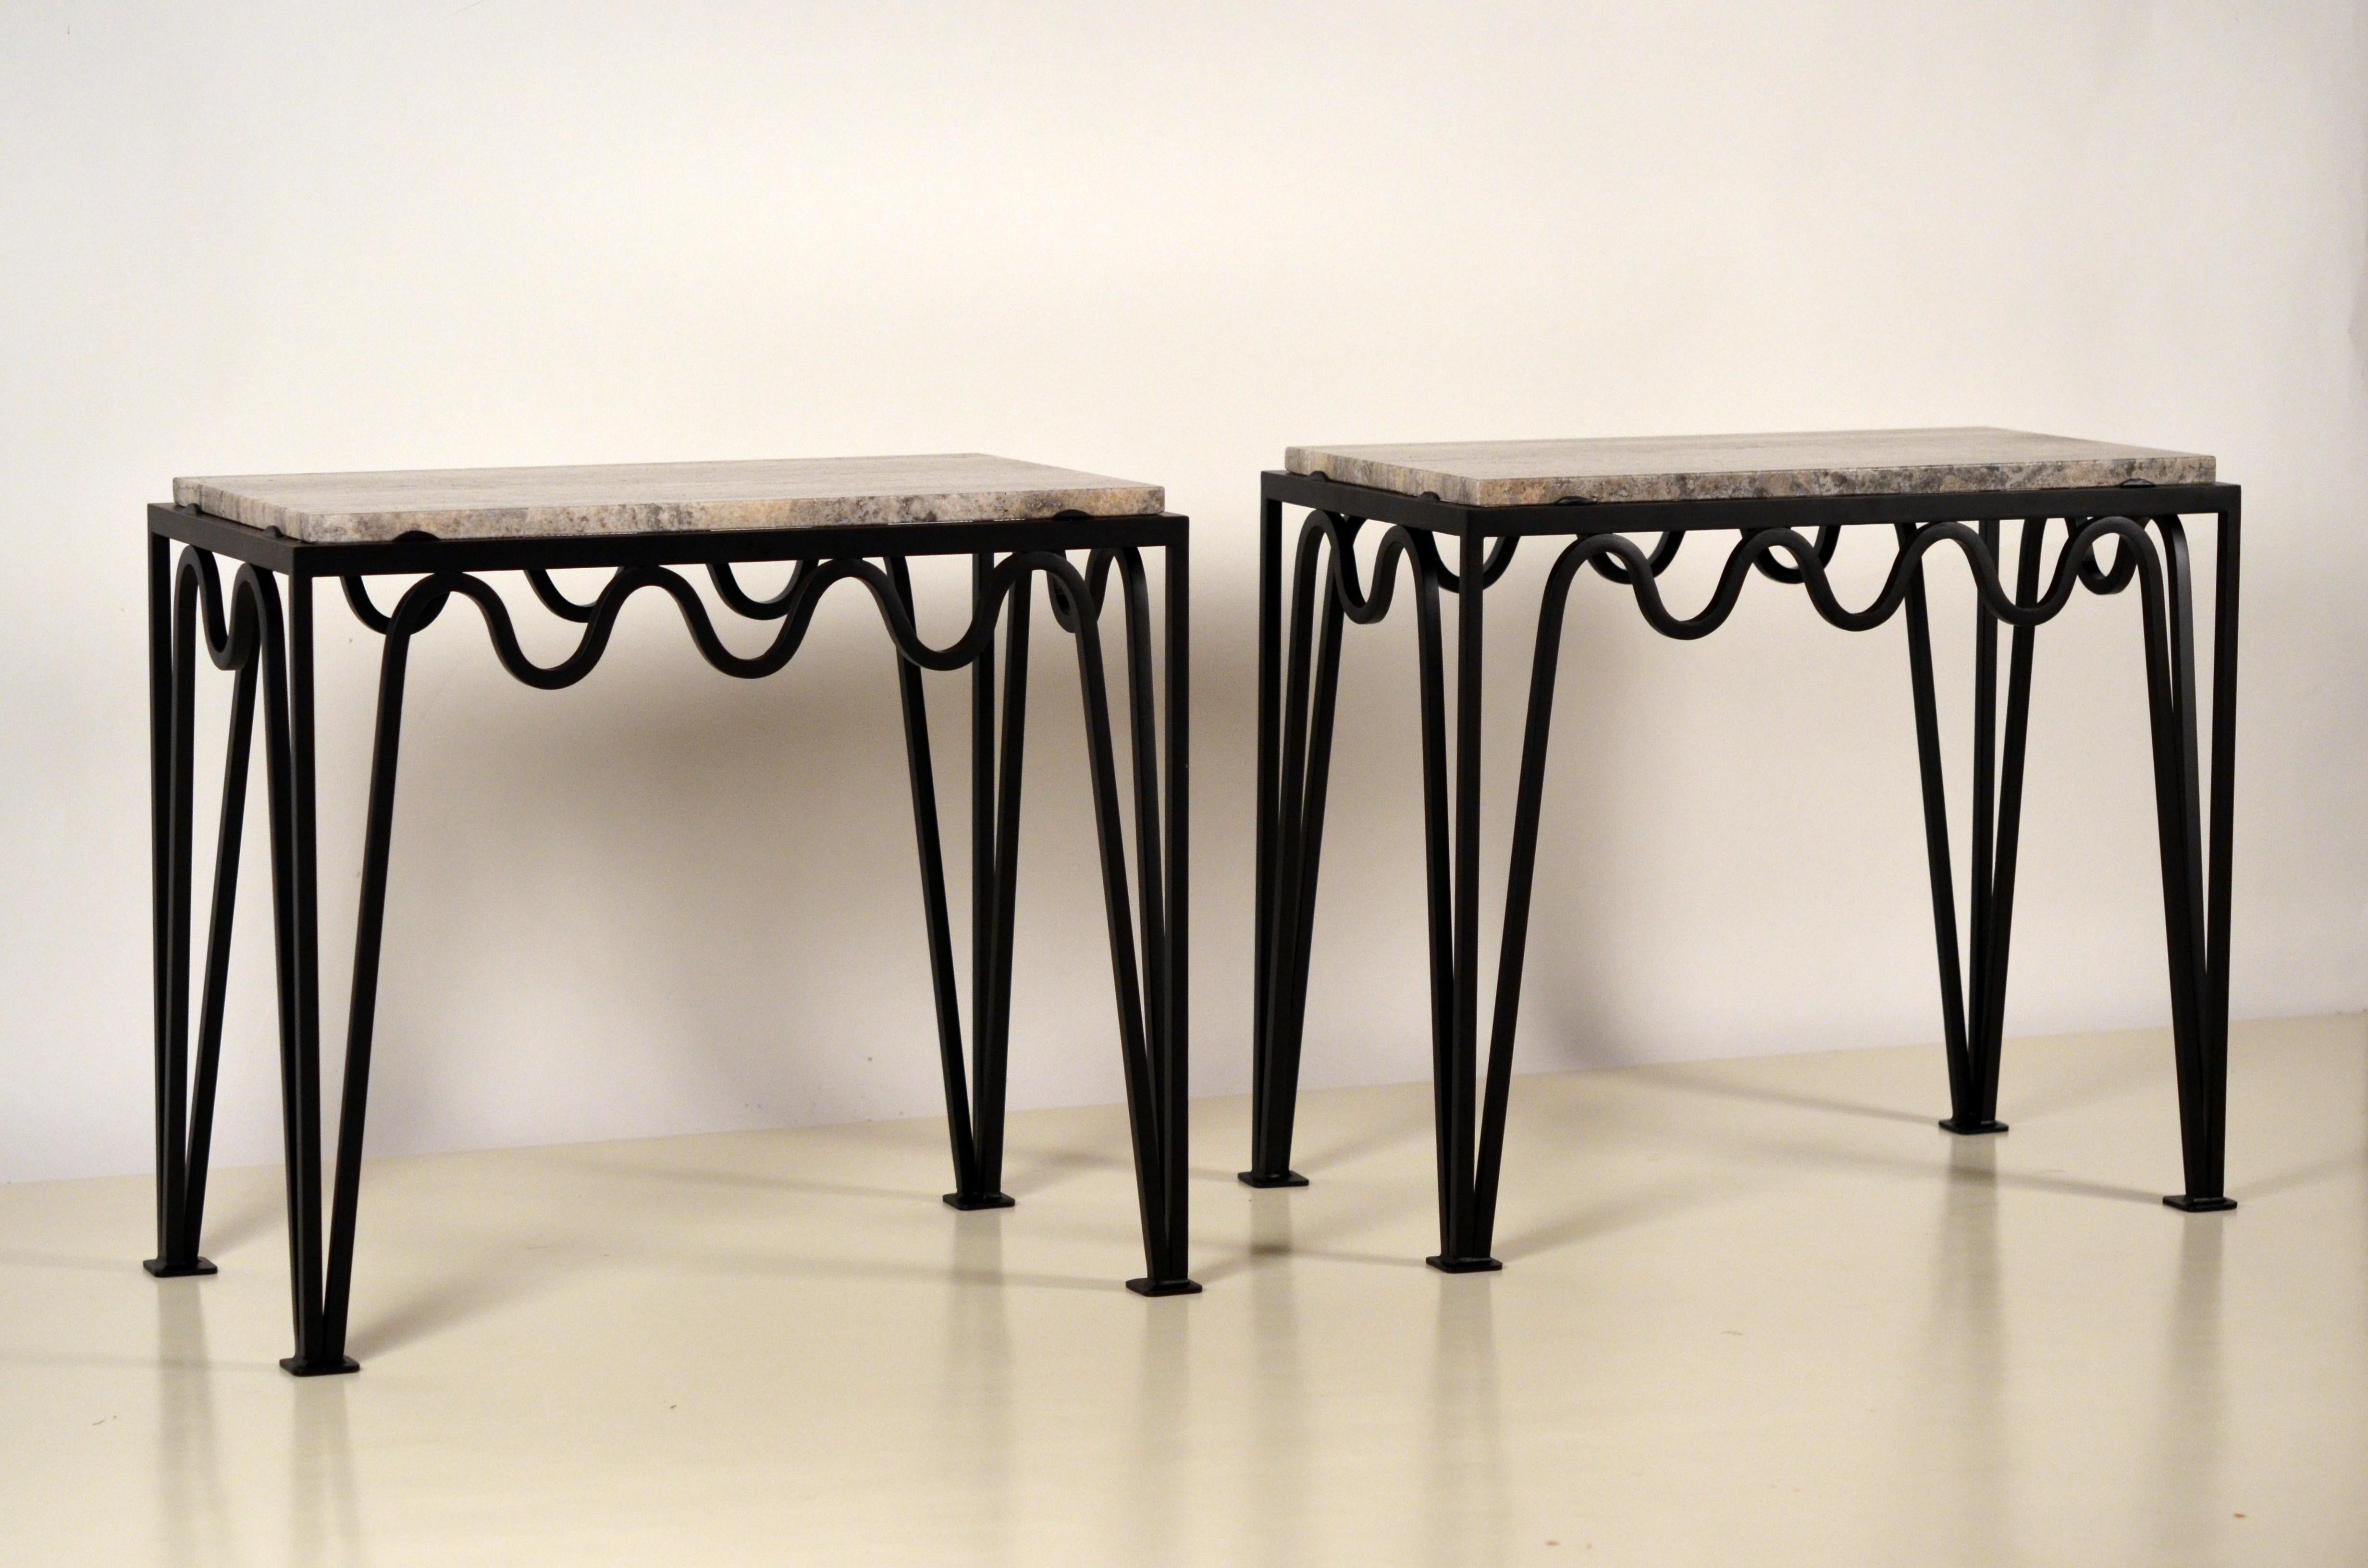 Pair of 'Méandre' black iron and silver travertine side tables by Design Frères.

Chic and understated.